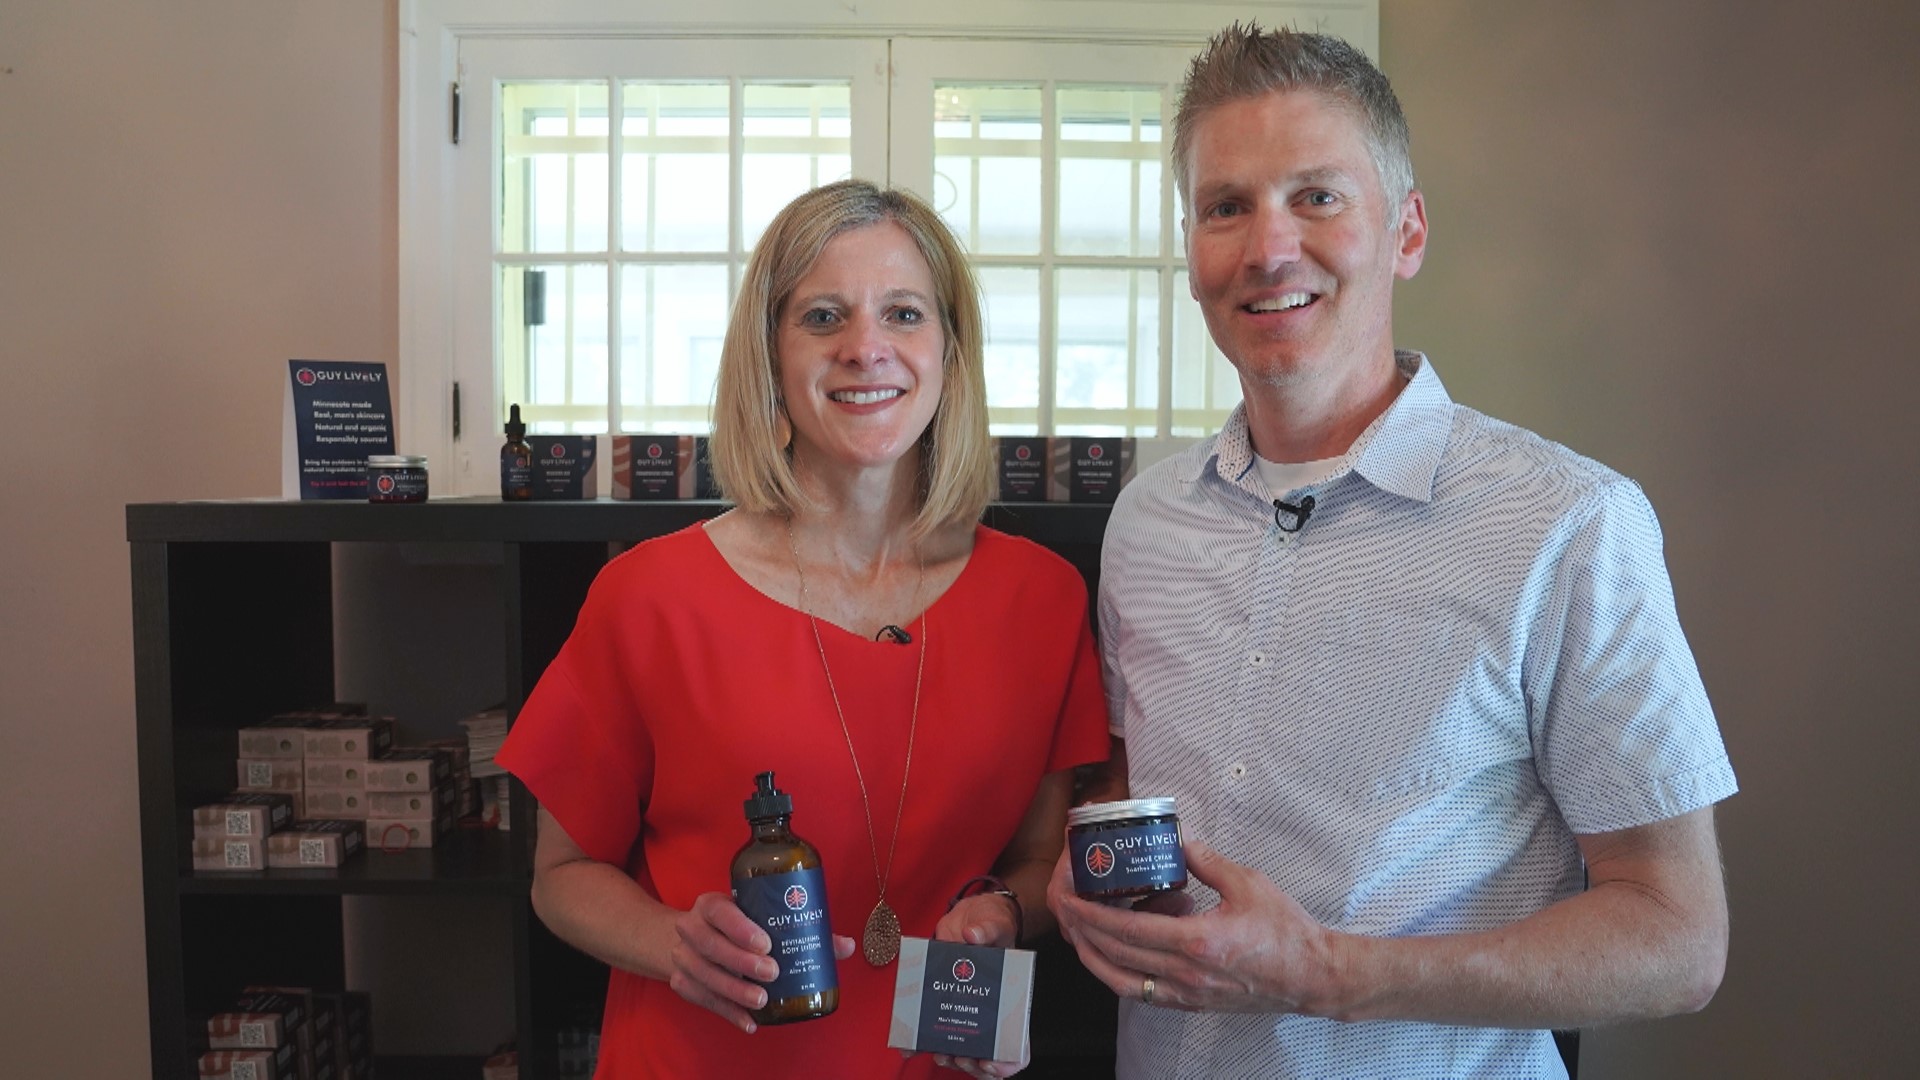 Inspired by their love for the outdoors, Heidi and Jay Woller launched "Guy Lively" — a men's natural skincare line.